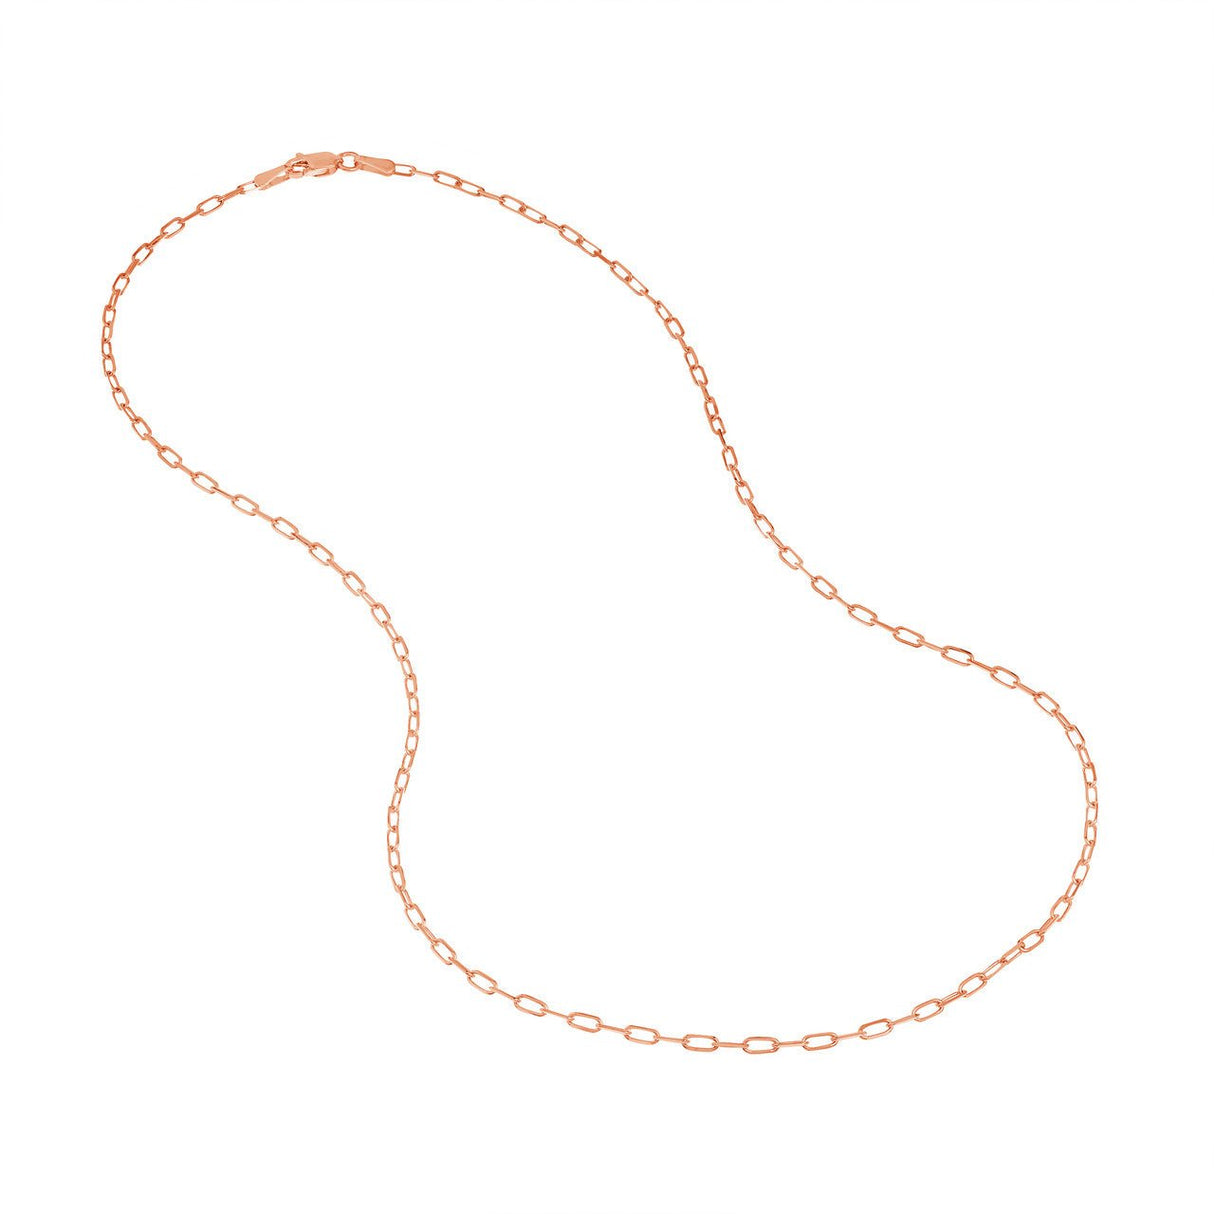 14K Gold Chain, 24", 1.95mm D/C Paper Clip Chain with Lobster Lock, Gold Layered Chains, Gold Chain Necklace, - Diamond Origin